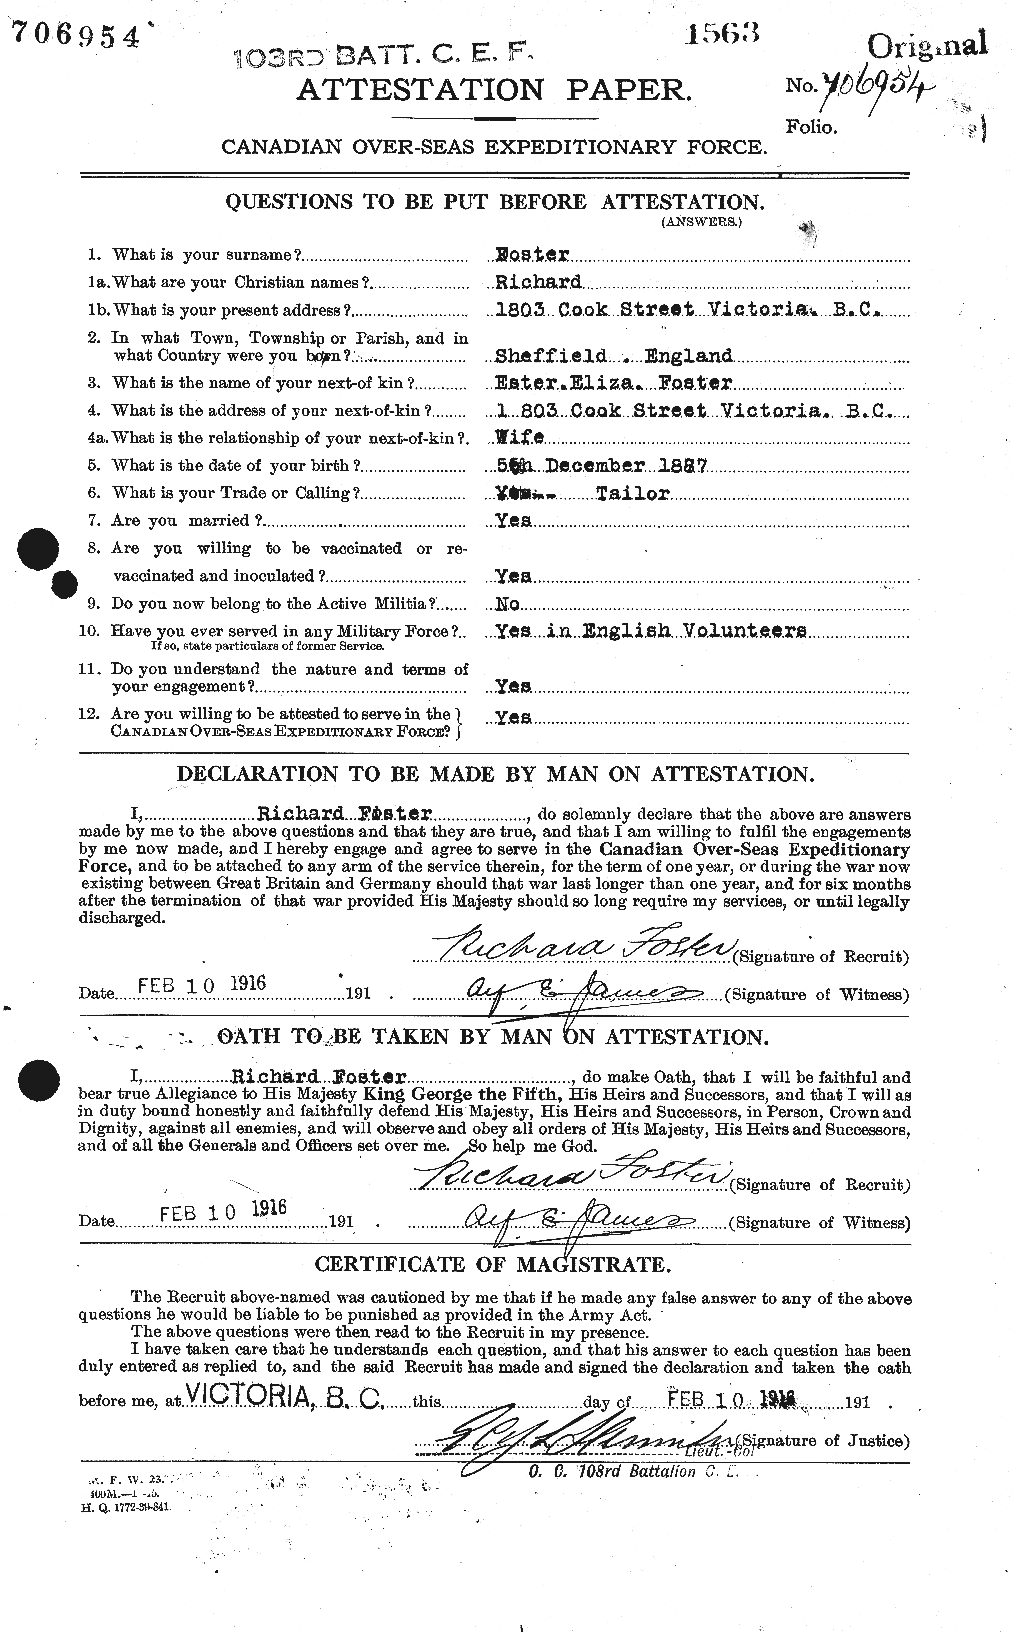 Personnel Records of the First World War - CEF 335155a